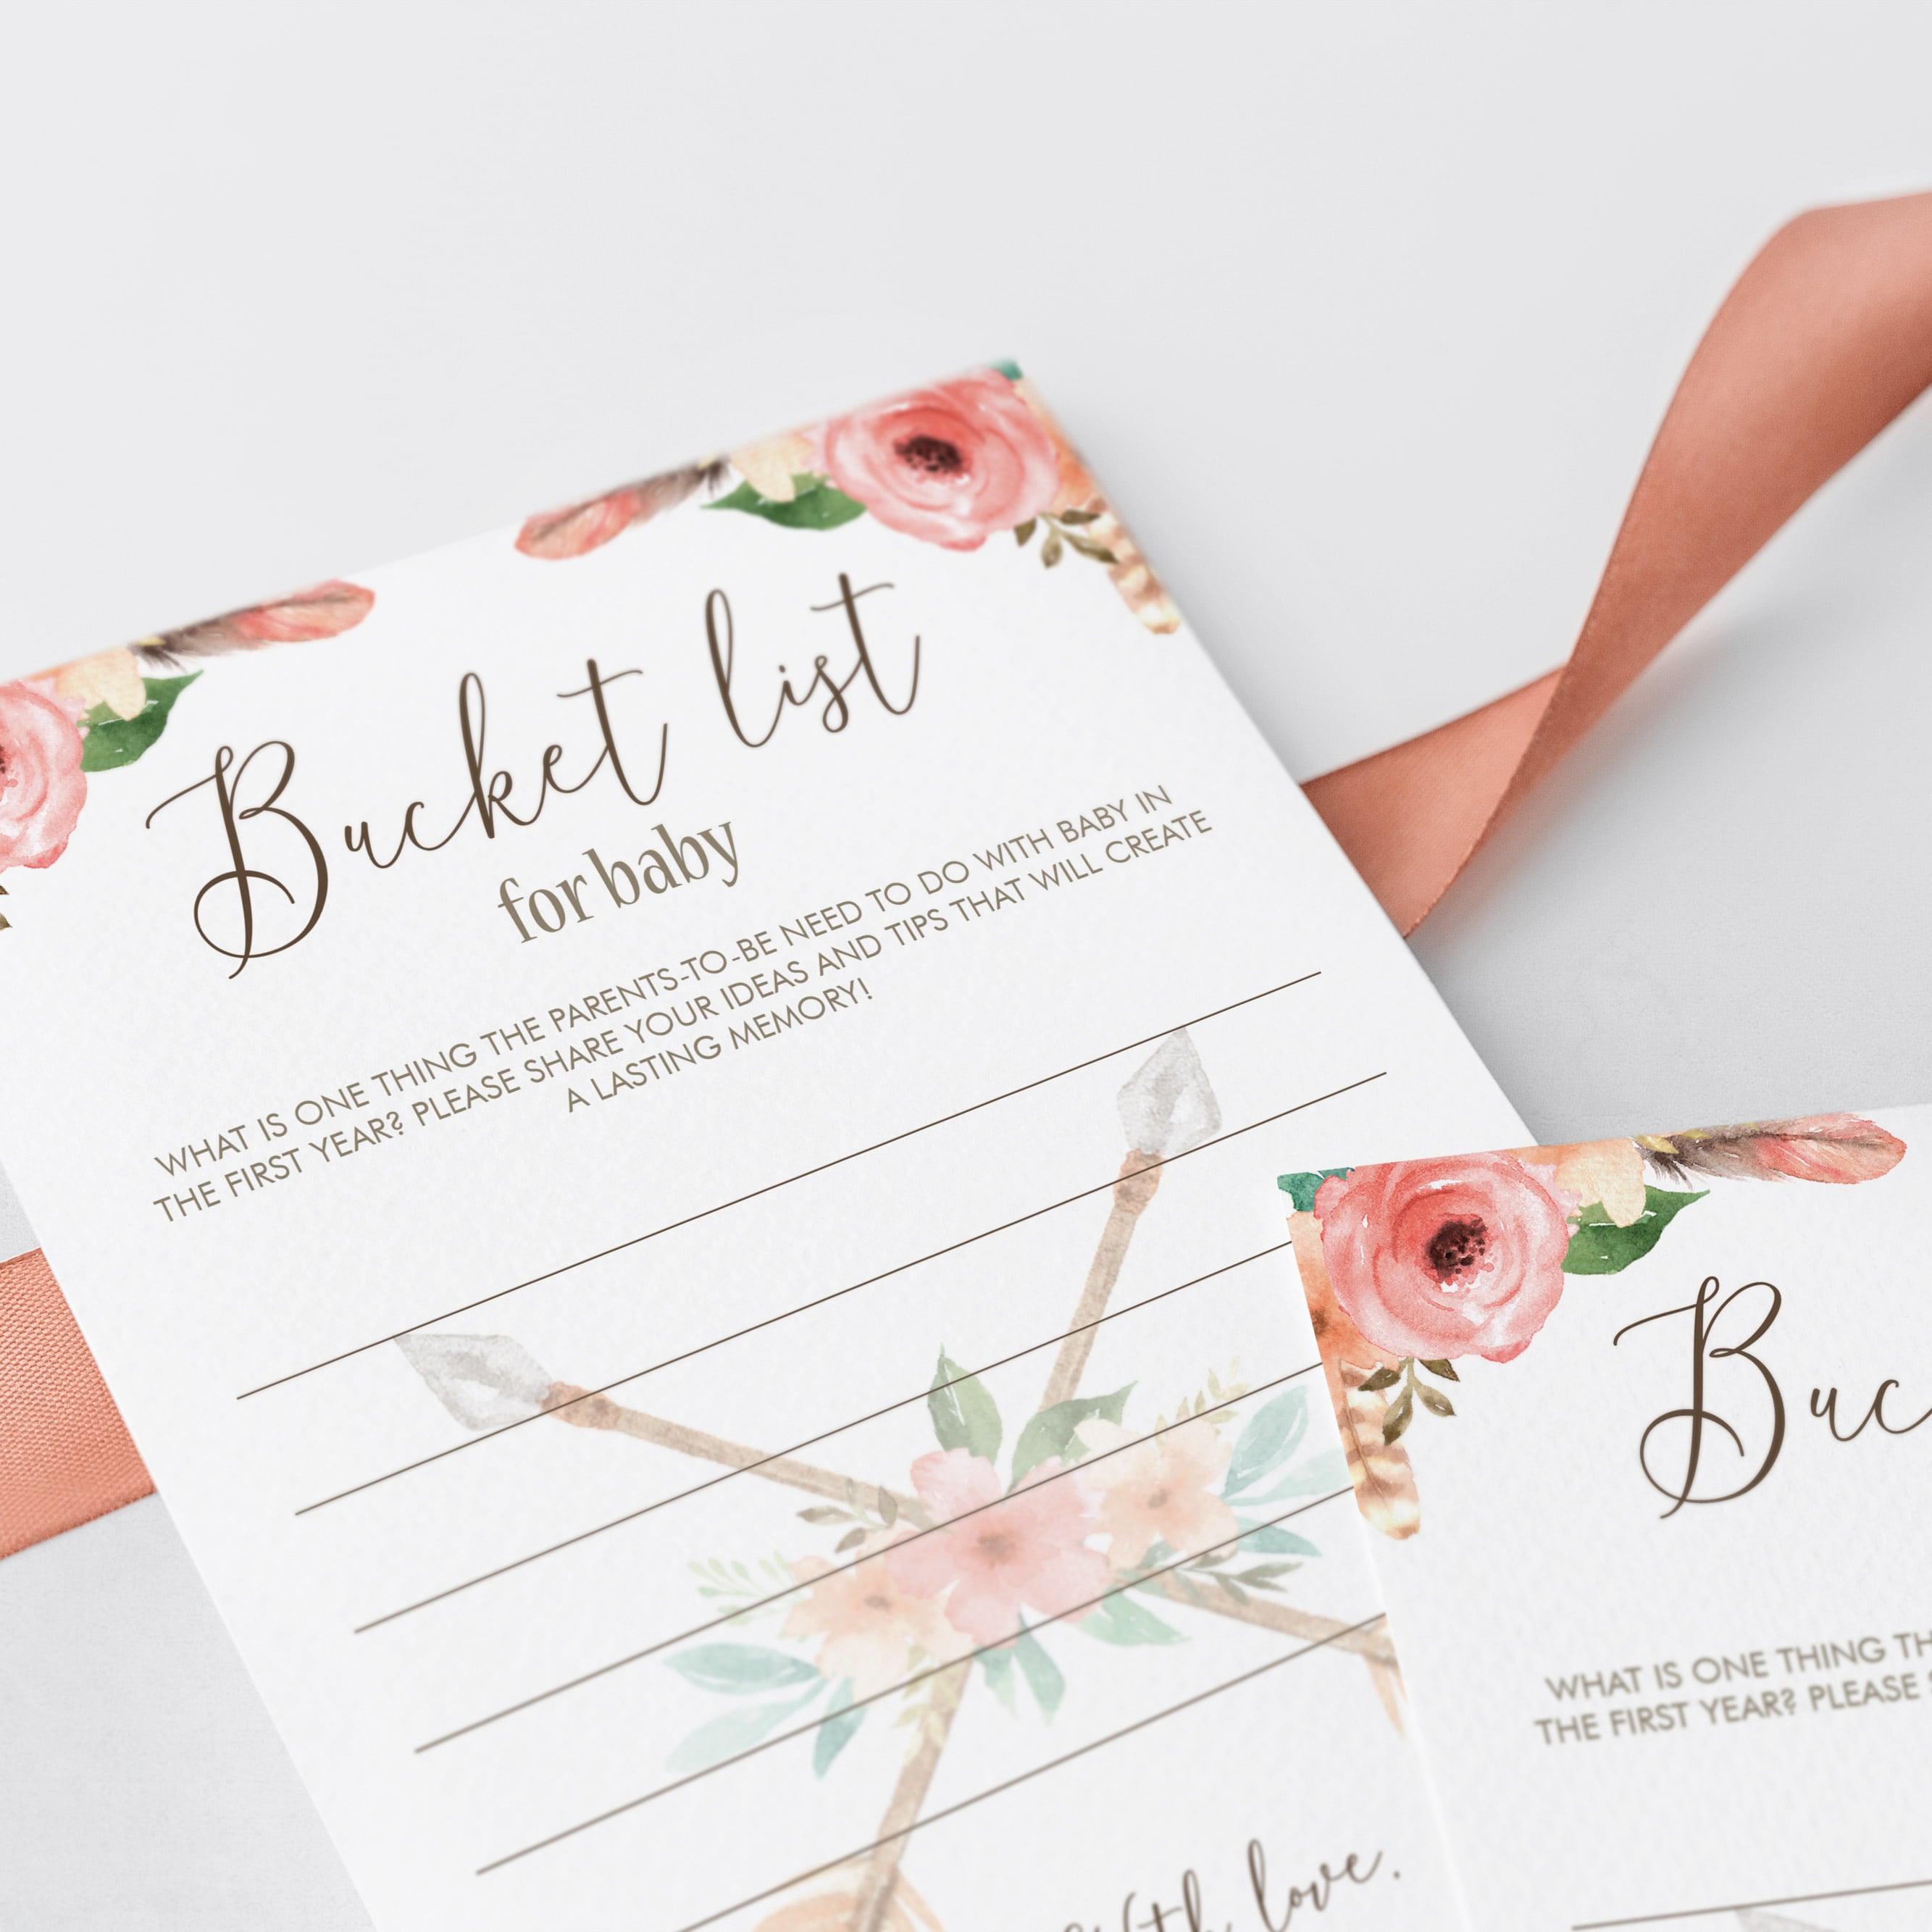 Bucket list for baby keepsake cards for baby shower by LittleSizzle